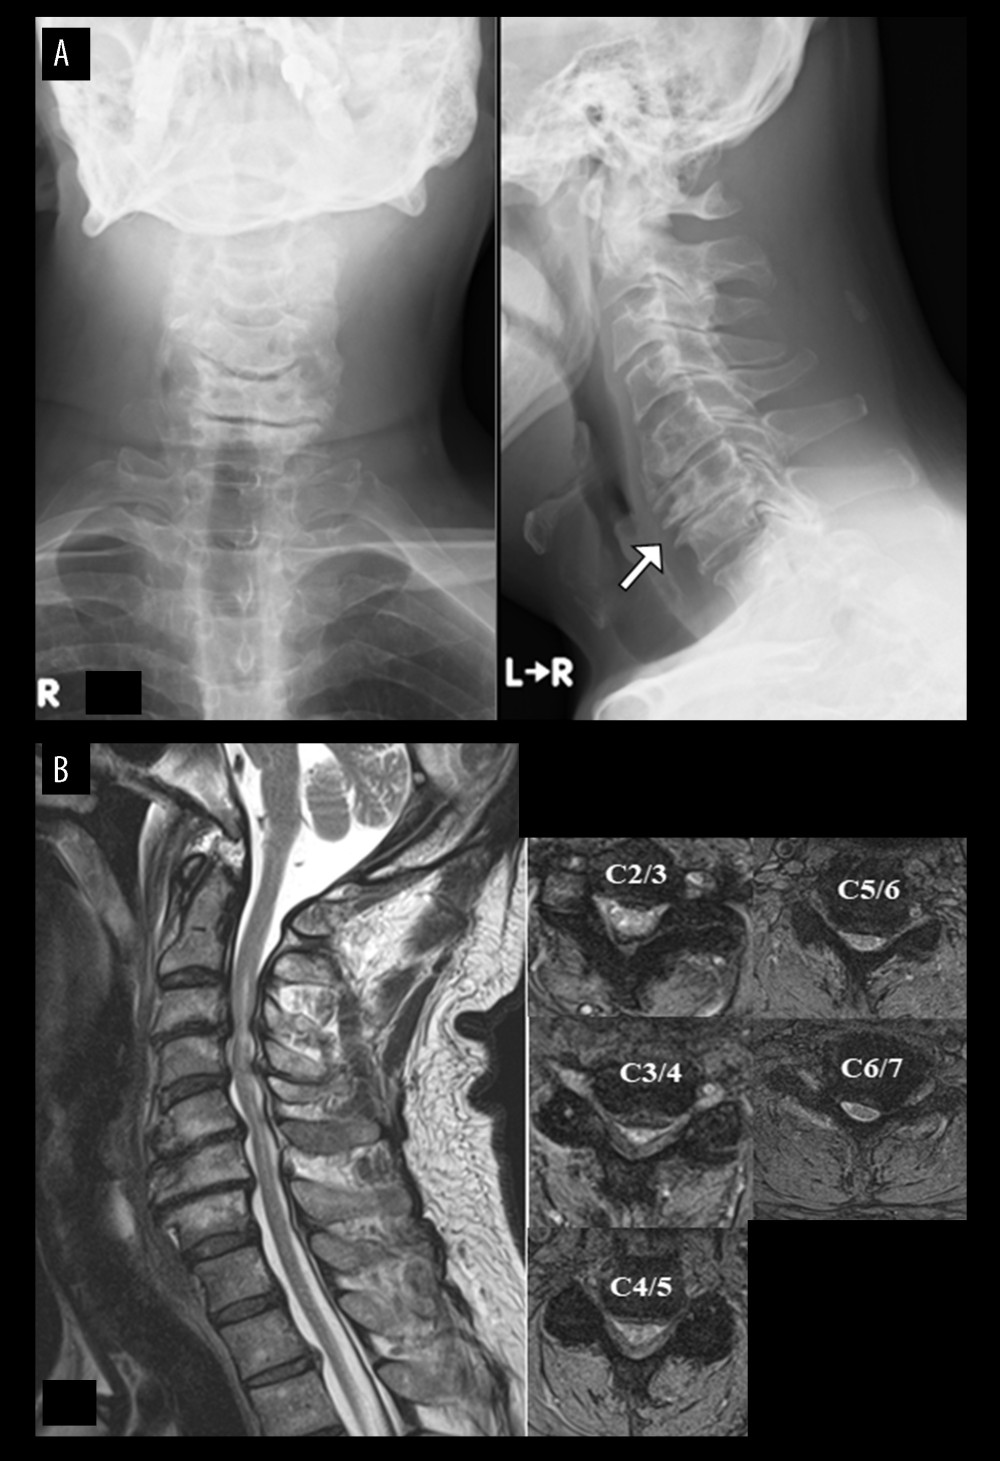 Case 2. A 52-year-old man with athetoid and dystonic cerebral palsy associated with degenerative cervical spondylotic myelopathy (preoperative findings). (A) Radiography showed lower cervical deformity (white arrow). (B) Magnetic resonance imaging showed spinal canal stenosis from C3/4 to C6/7.